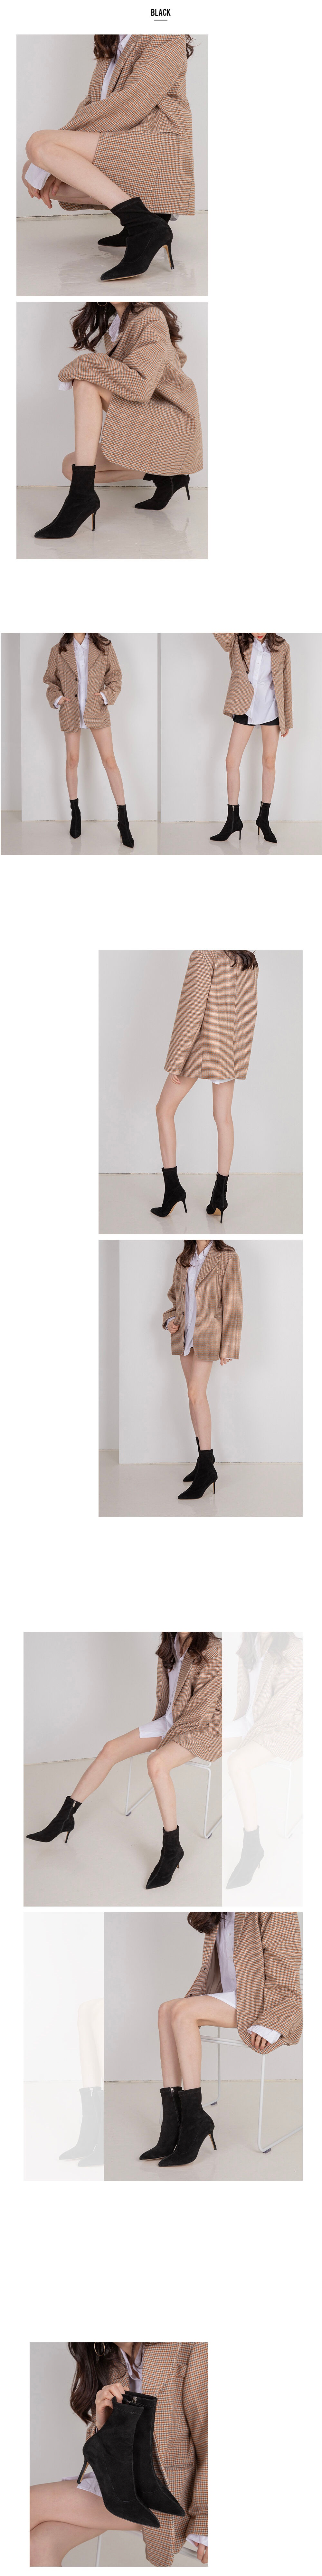 Twinkletto ankle boots-Span Suede(4colors) - 감도 깊은 취향 셀렉트샵 29CM